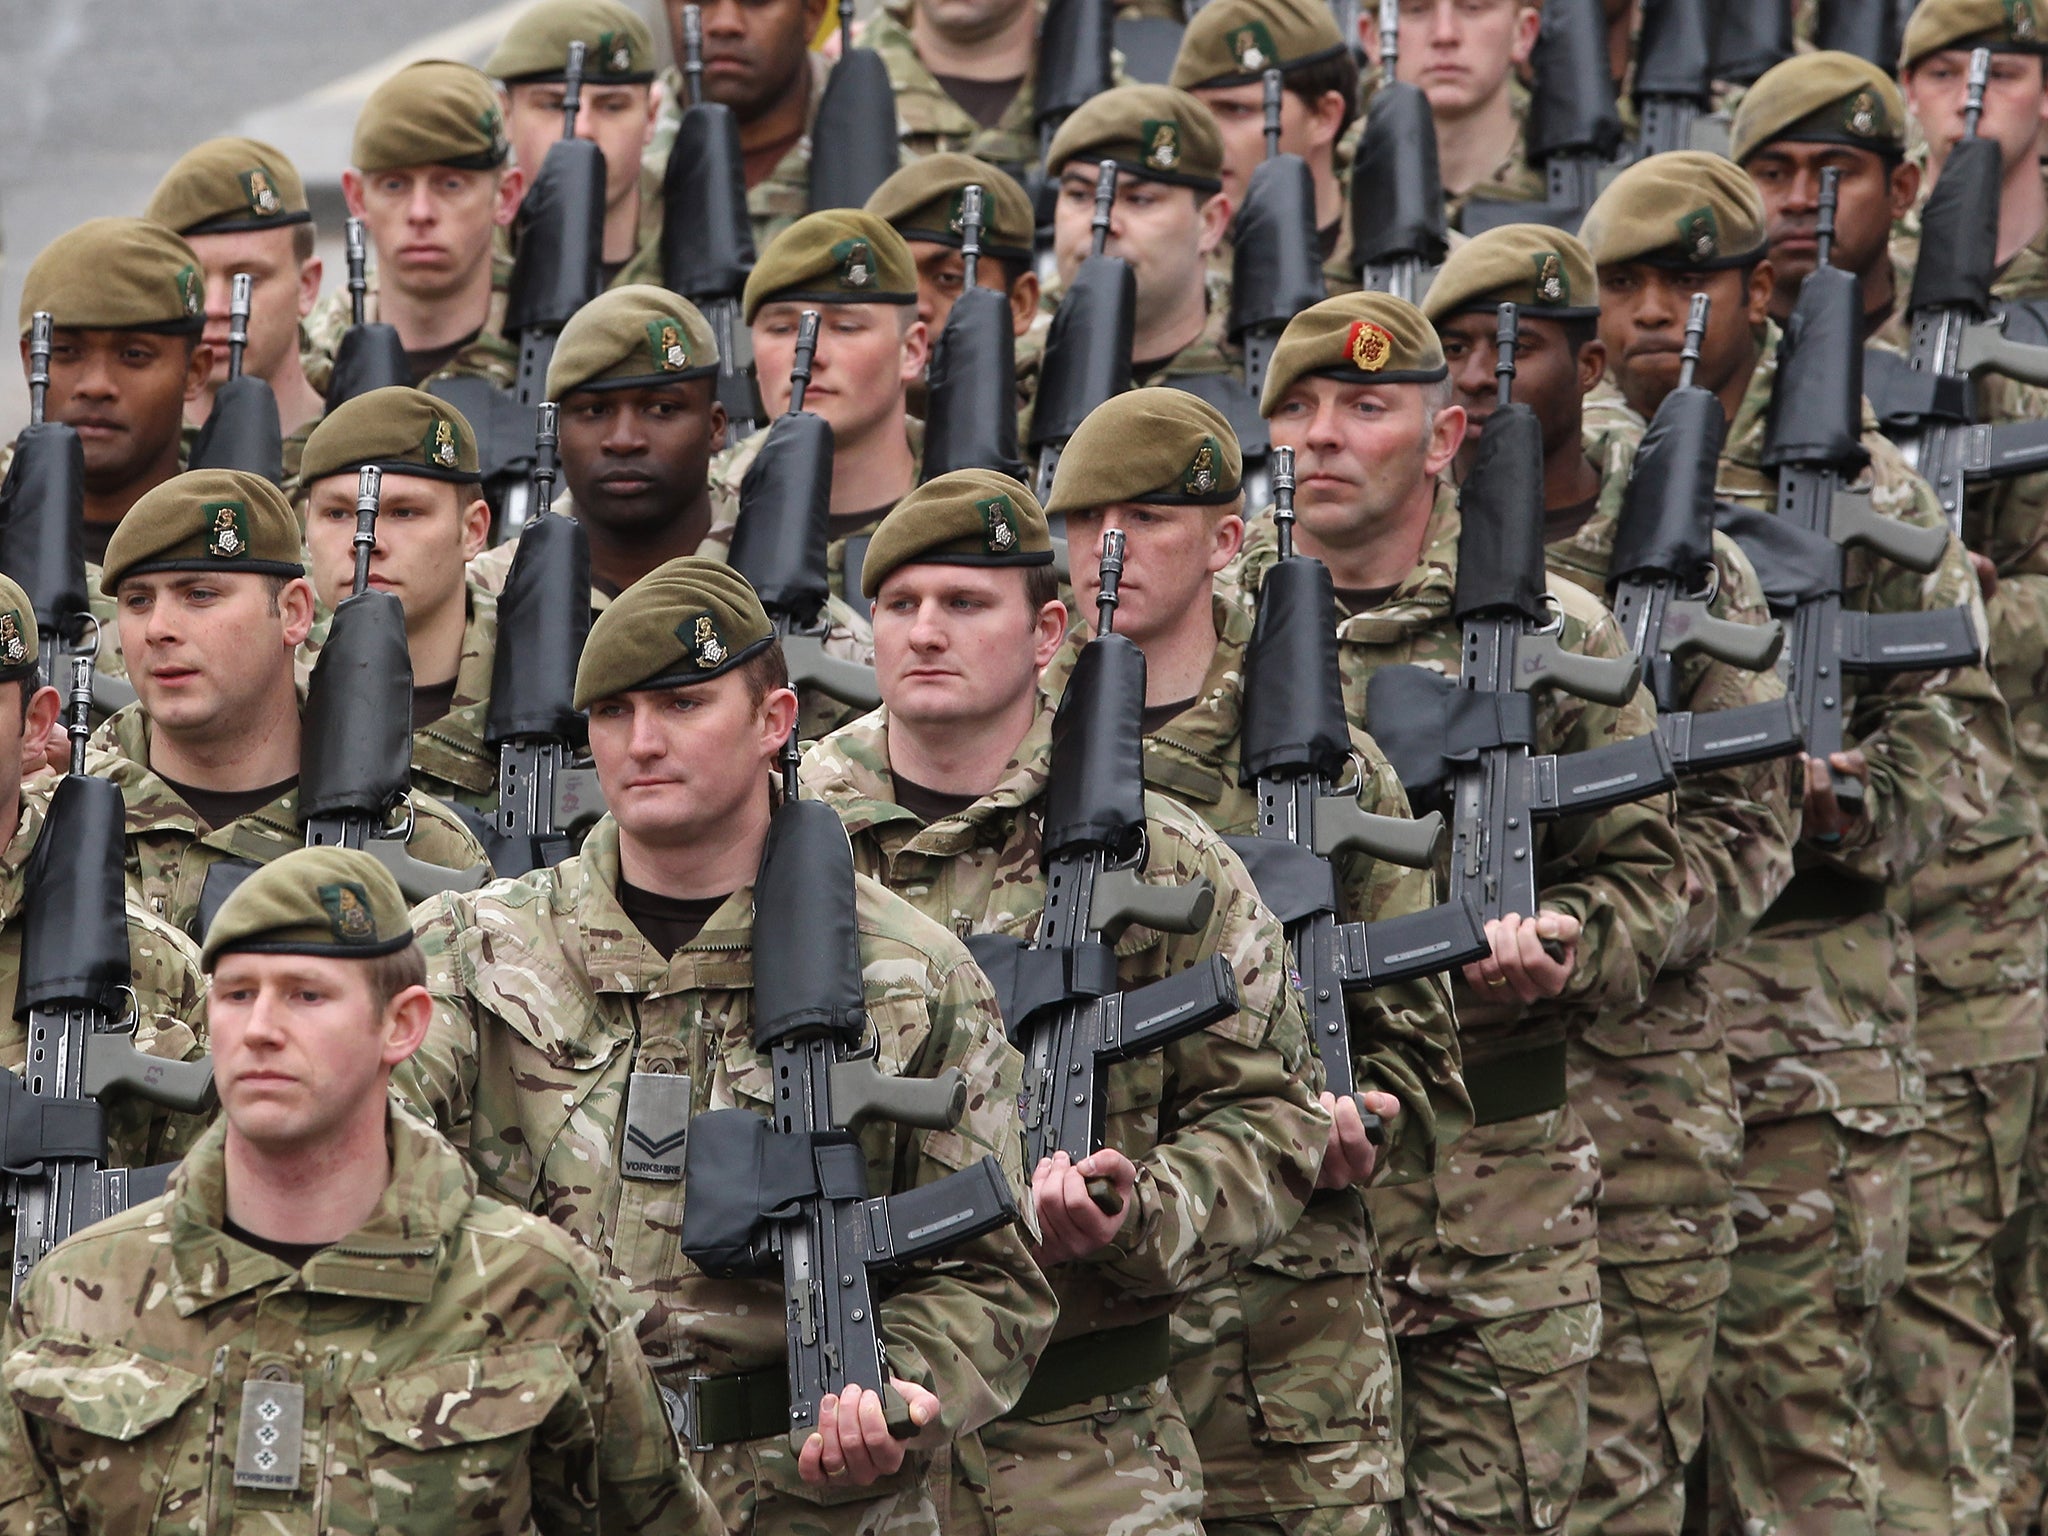 A report last year warned that army, navy and RAF recruitment was falling below target